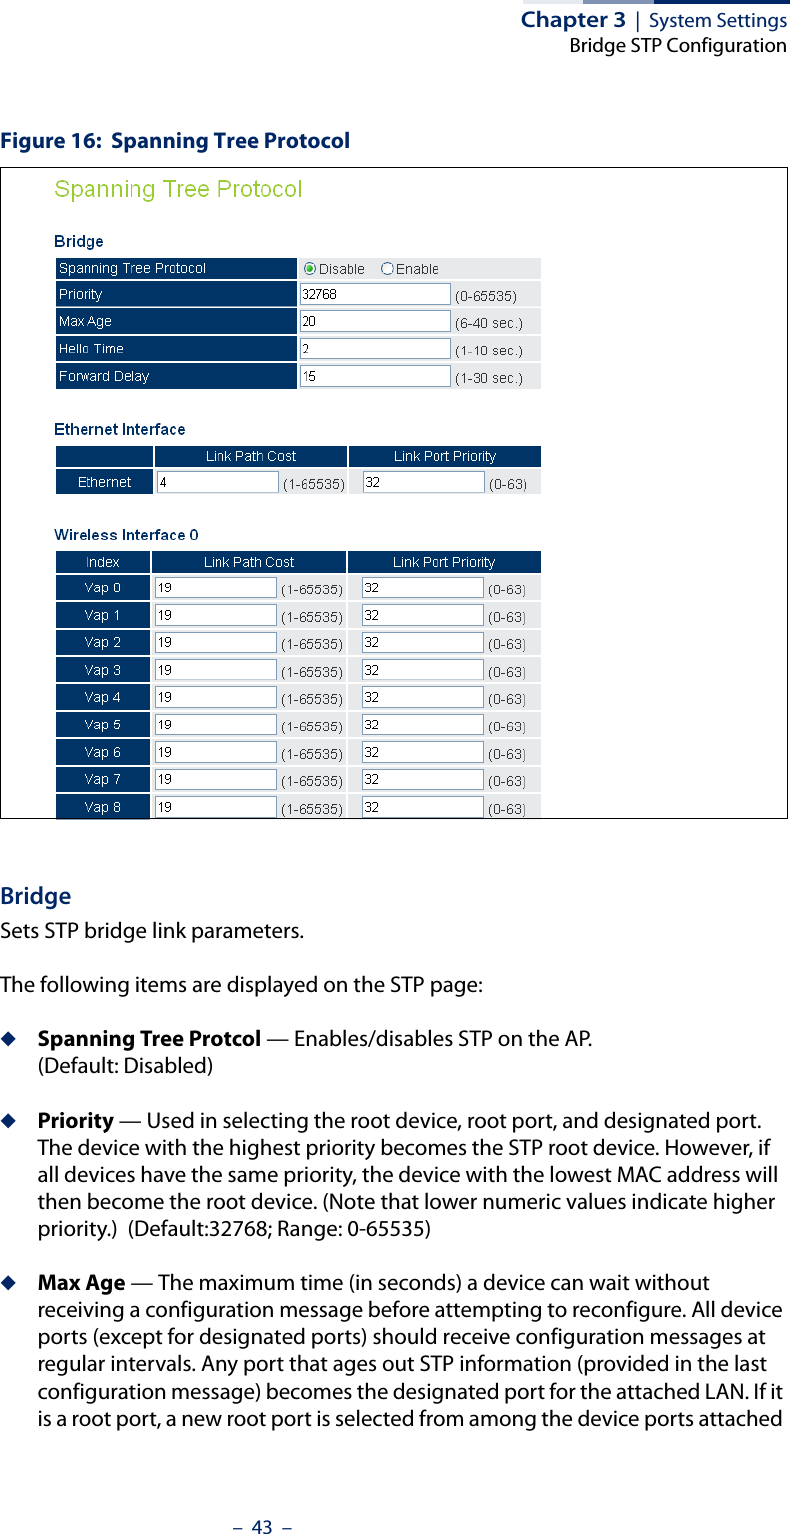 Chapter 3  |  System SettingsBridge STP Configuration–  43  –Figure 16:  Spanning Tree ProtocolBridgeSets STP bridge link parameters.The following items are displayed on the STP page:◆Spanning Tree Protcol — Enables/disables STP on the AP. (Default: Disabled)◆Priority — Used in selecting the root device, root port, and designated port. The device with the highest priority becomes the STP root device. However, if all devices have the same priority, the device with the lowest MAC address will then become the root device. (Note that lower numeric values indicate higher priority.)  (Default:32768; Range: 0-65535)◆Max Age — The maximum time (in seconds) a device can wait without receiving a configuration message before attempting to reconfigure. All device ports (except for designated ports) should receive configuration messages at regular intervals. Any port that ages out STP information (provided in the last configuration message) becomes the designated port for the attached LAN. If it is a root port, a new root port is selected from among the device ports attached 